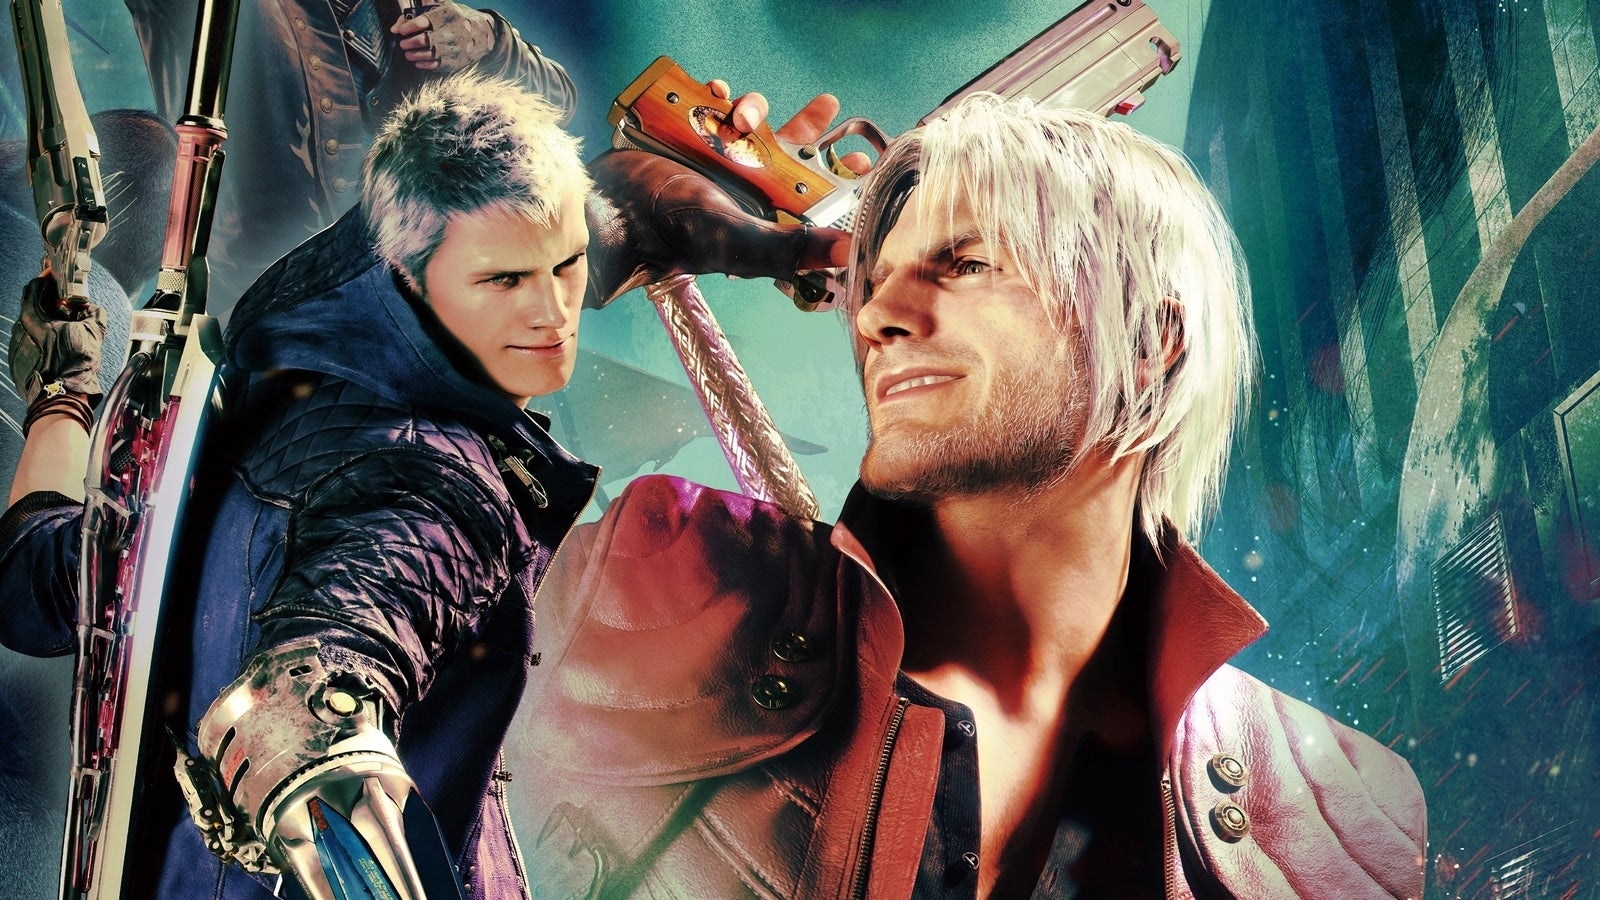 Here Are The First Details For The Devil May Cry Anime